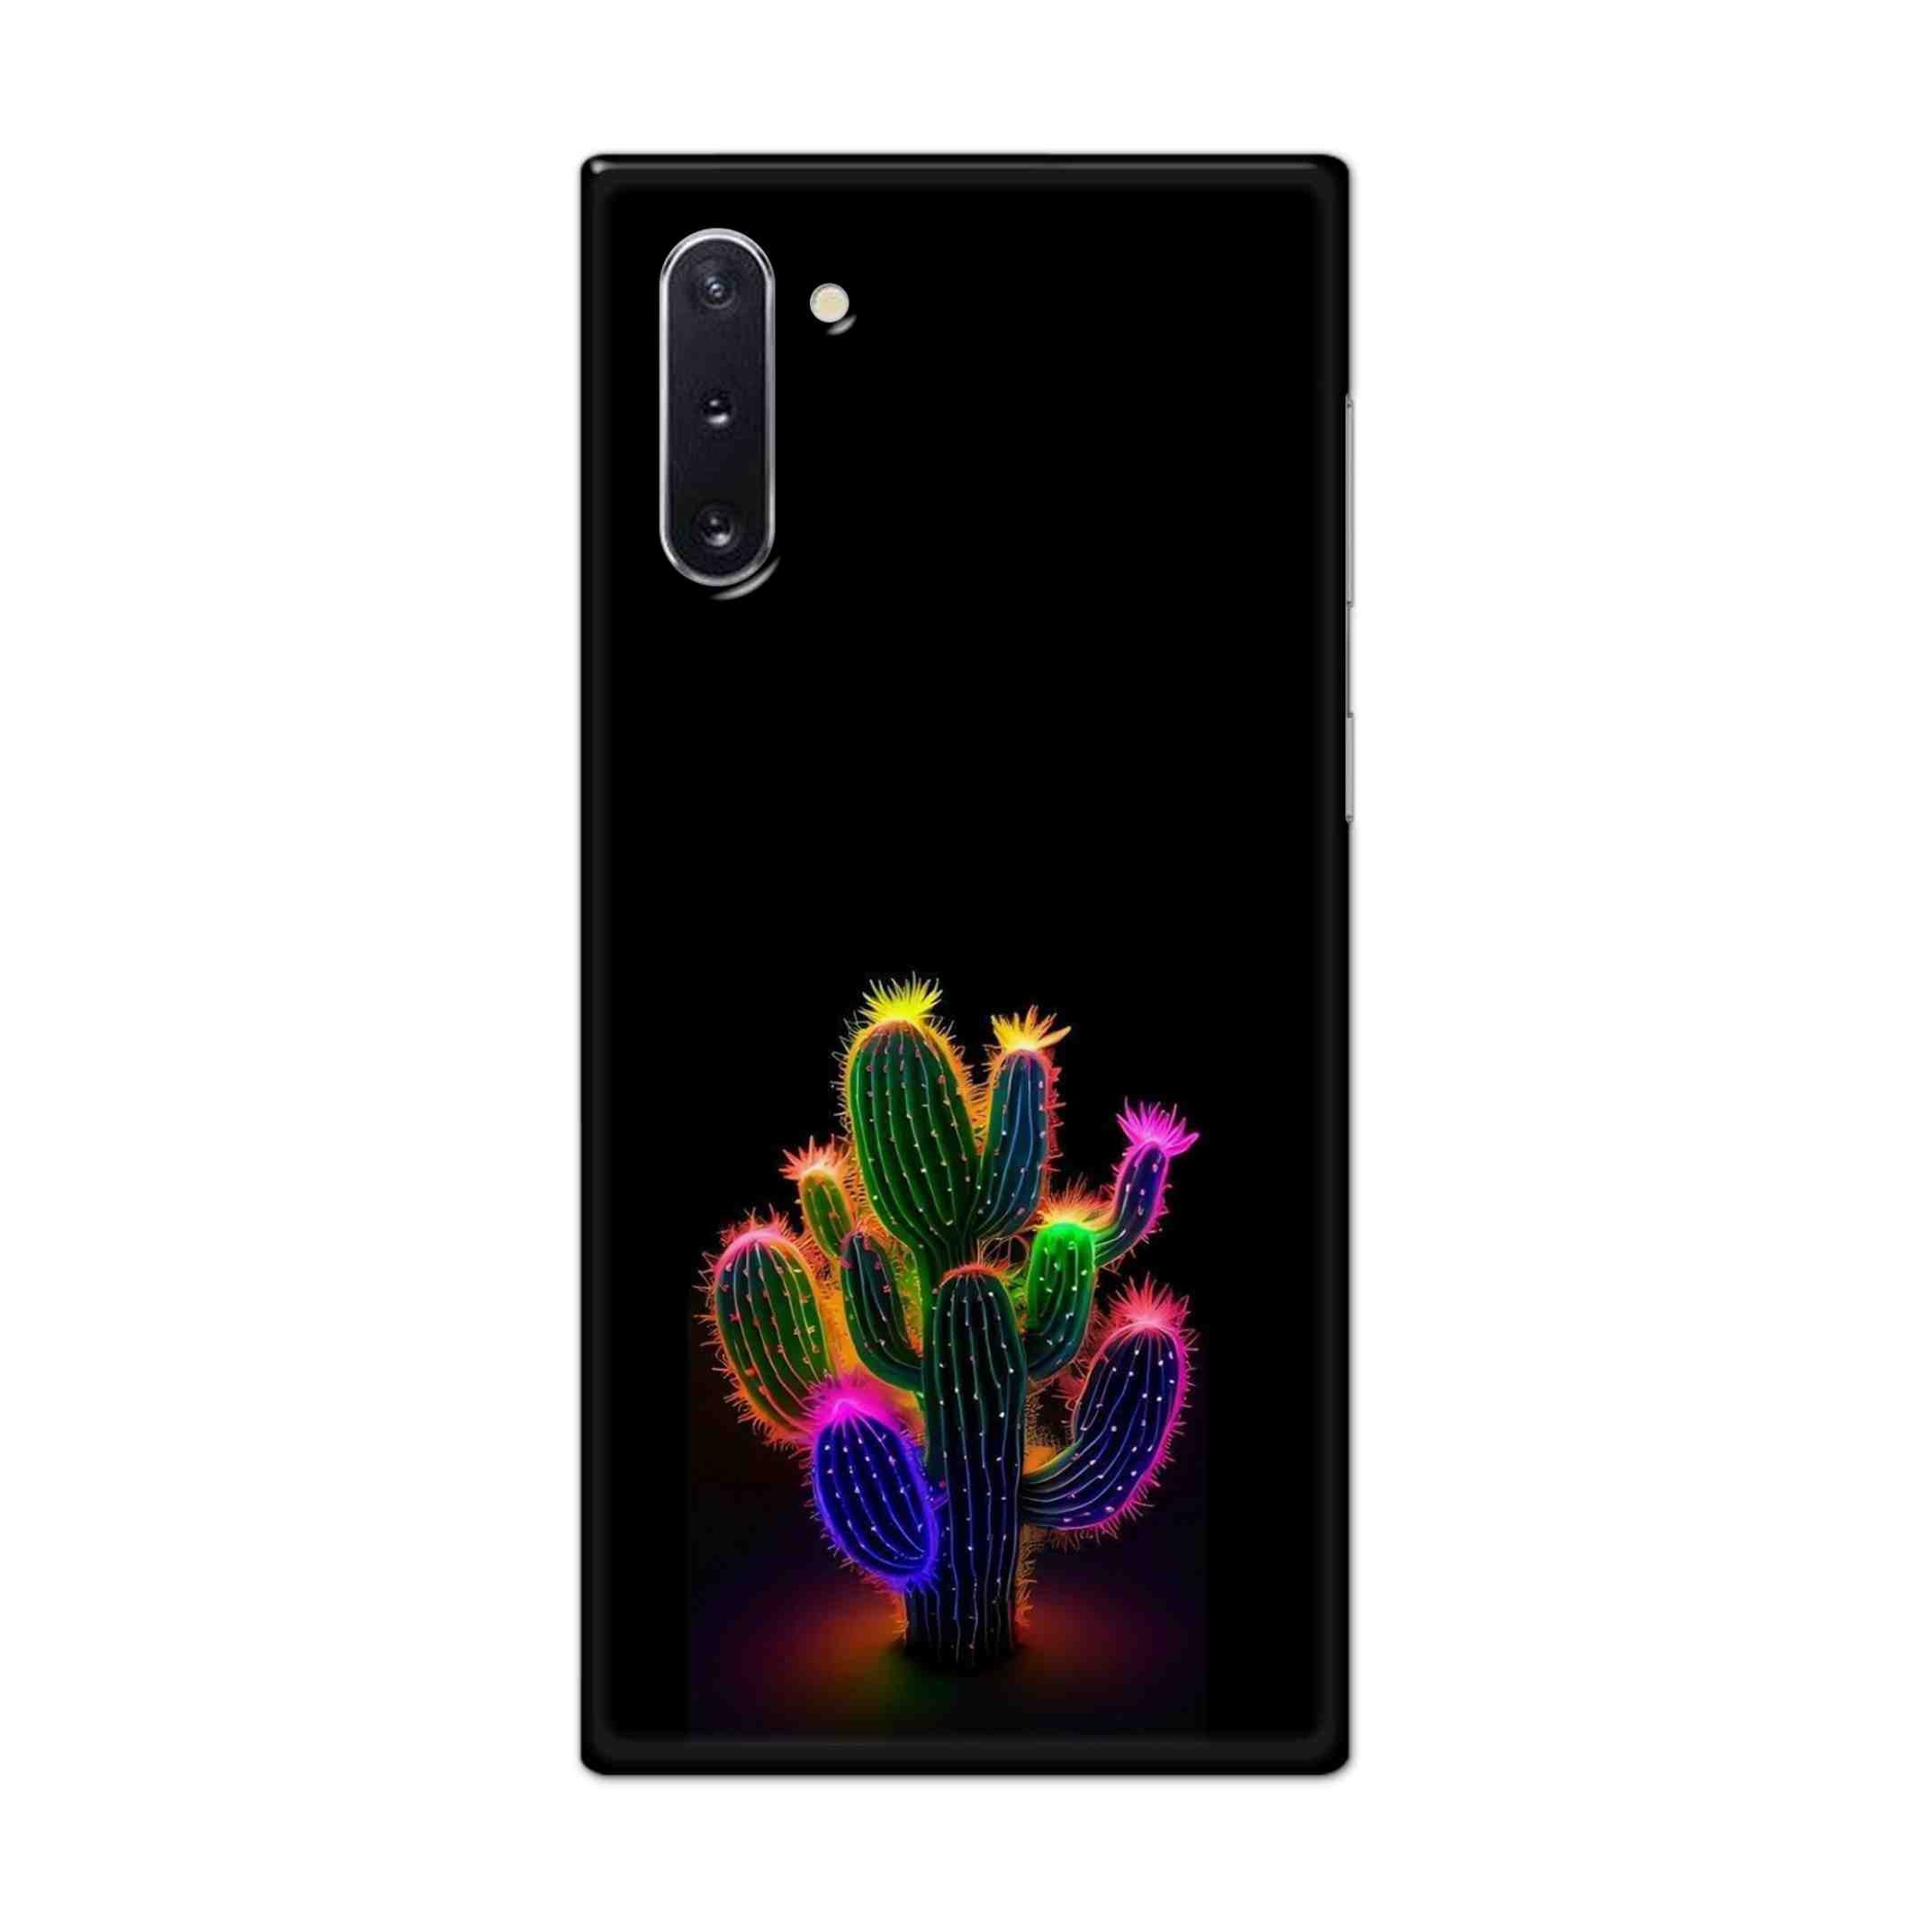 Buy Neon Flower Hard Back Mobile Phone Case Cover For Samsung Galaxy Note 10 Online